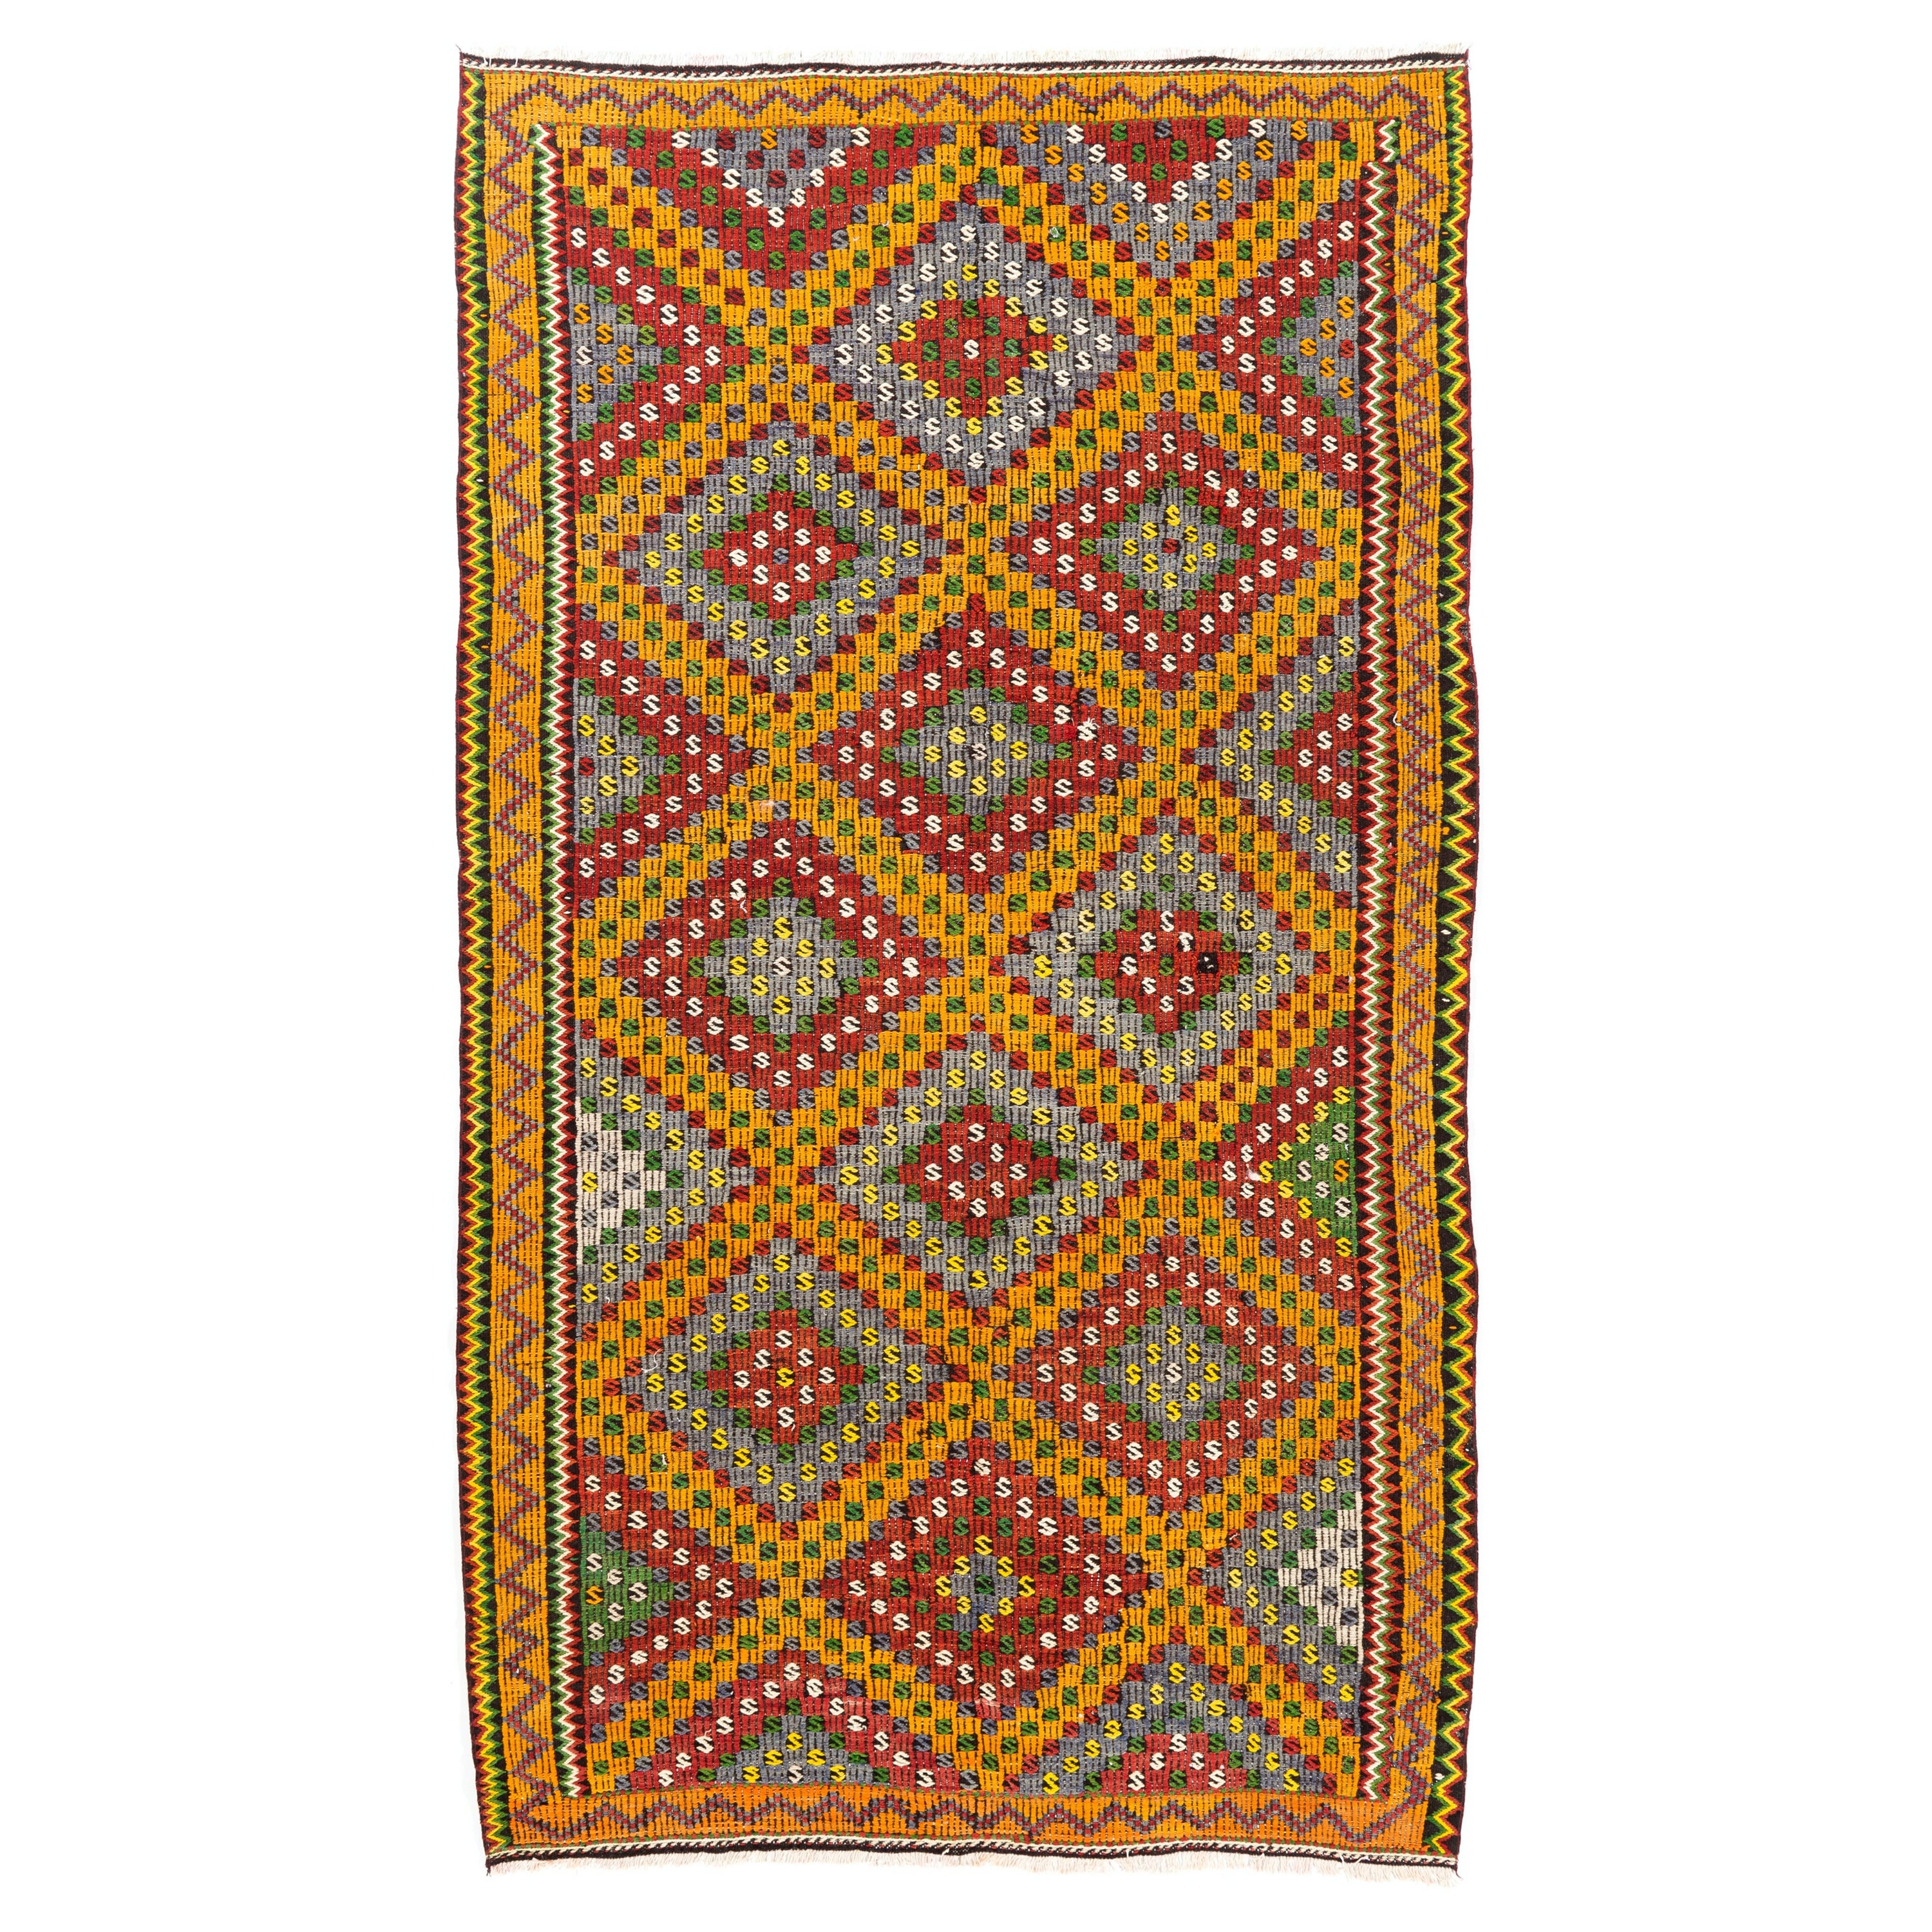 6x10.7 Ft Turkish Kilim in Red, Yellow, Green & Gray Colors. Dazzling Jijim Rug For Sale